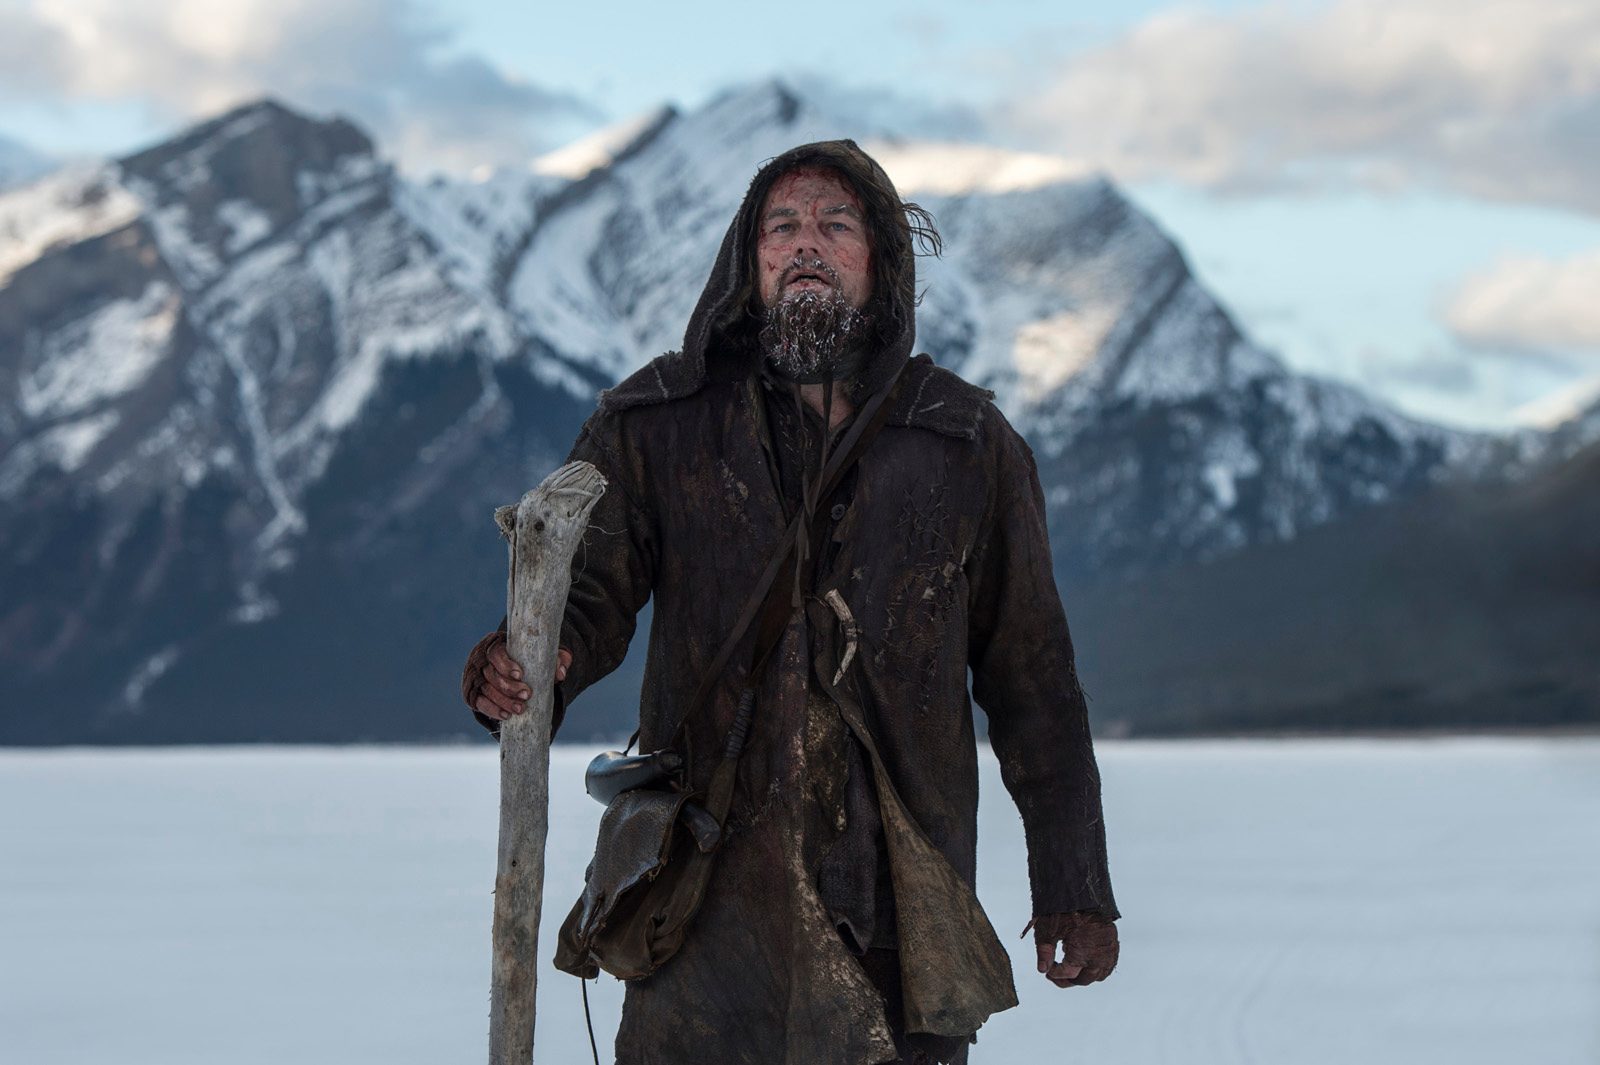 ‘The Revenant’ Review: The spectacle of suffering